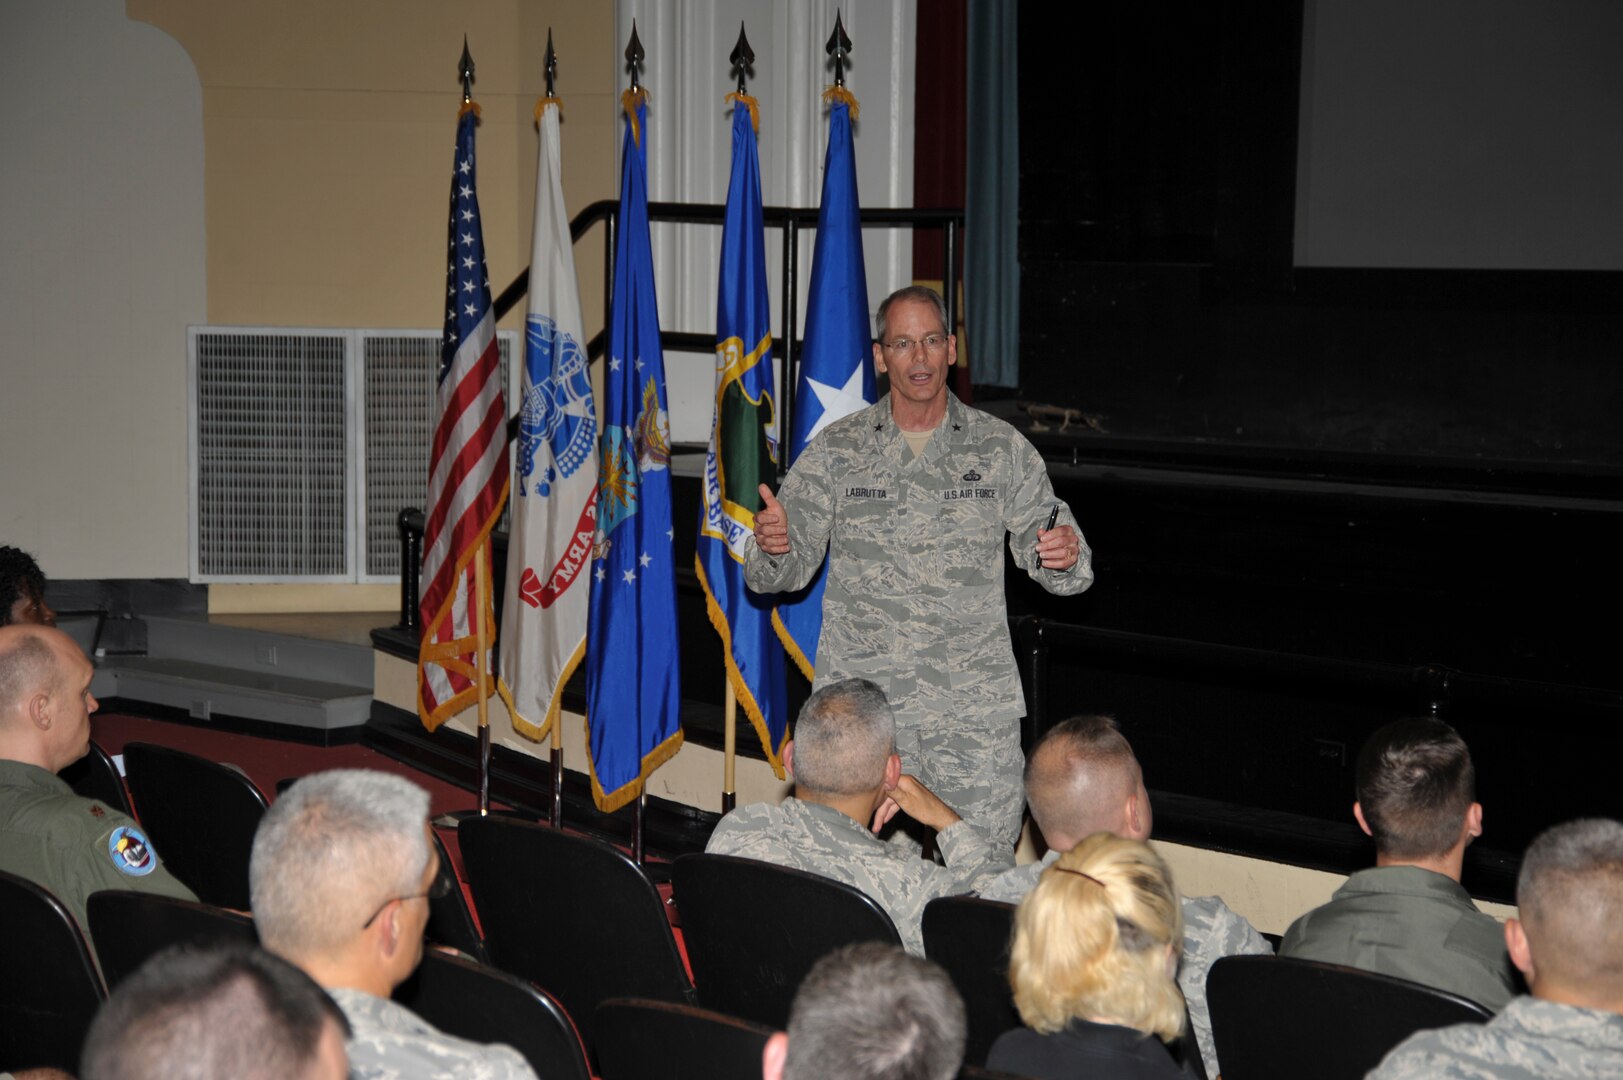 Brig. Gen. Bob LaBrutta, Joint Base San Antonio and 502nd Air Base Wing commander, hosted town hall meetings at JBSA-Lackland, JBSA-Randolph and JBSA-Fort Sam Houston. (U.S. Air Force photo by Airman 1st Class Lincoln Korver)